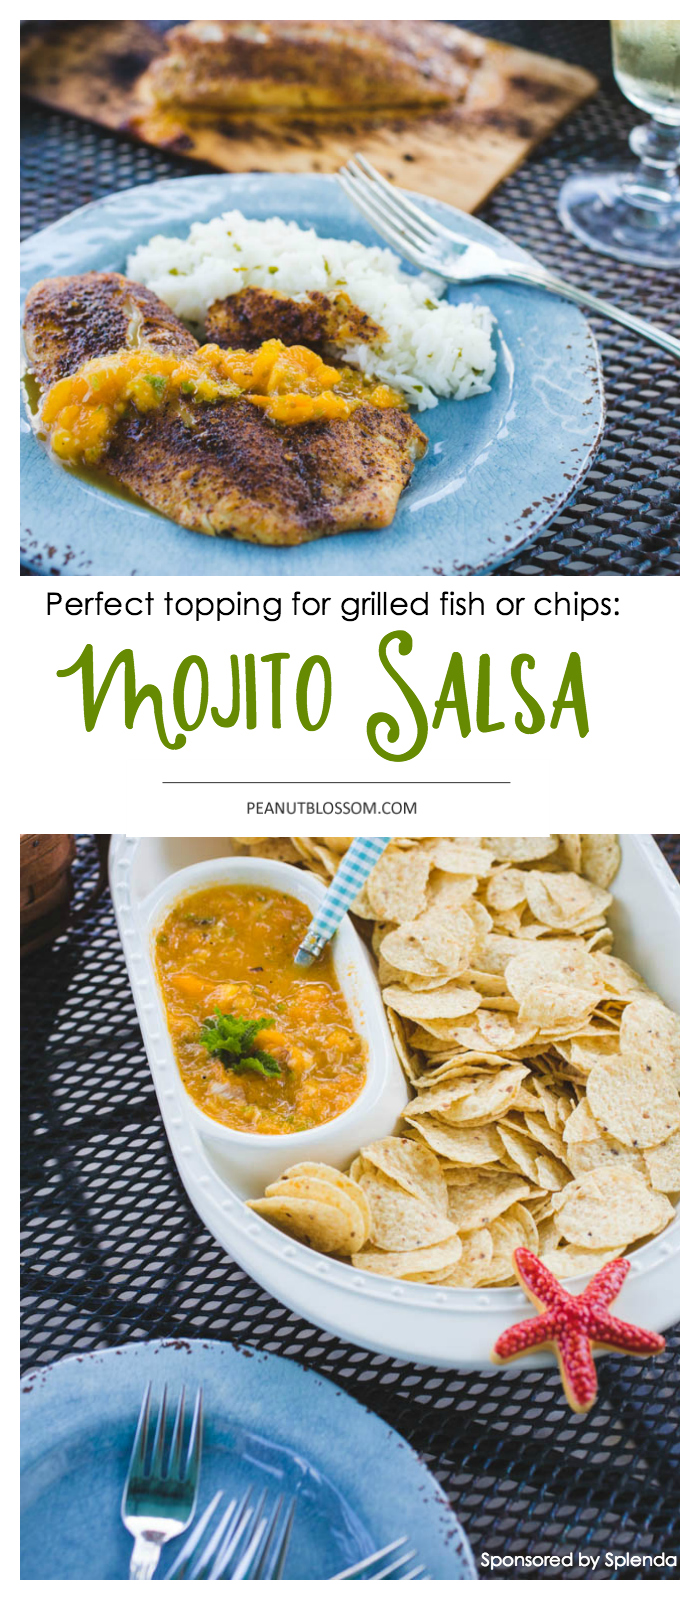 Grilled fish with mojito salsa